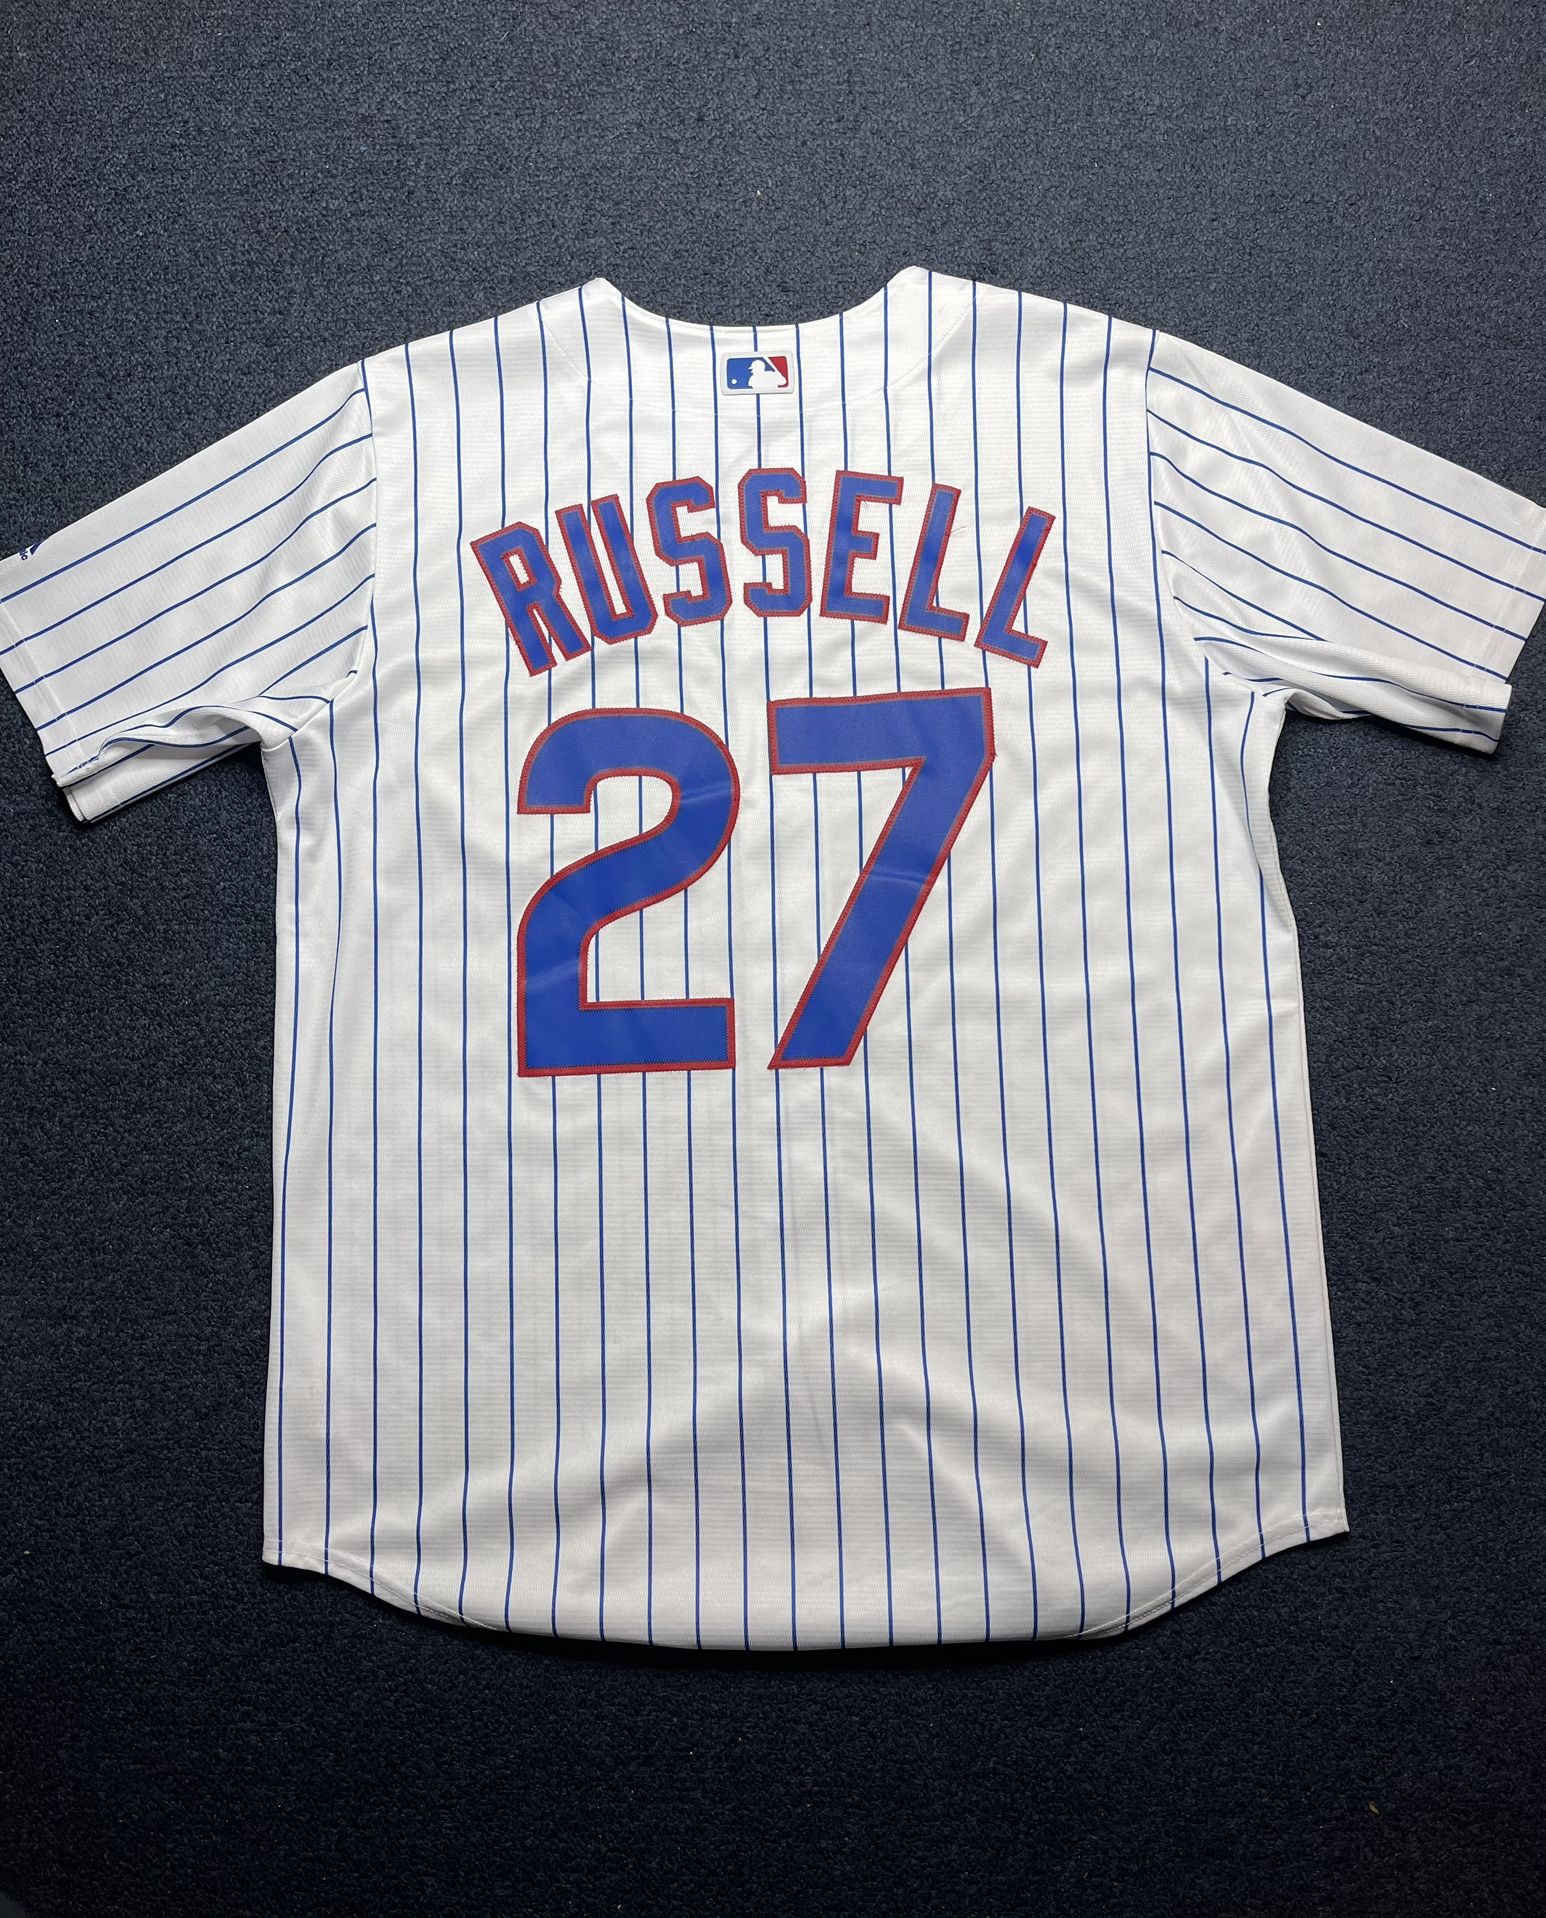 Chicago Cubs “Russell” Jersey 